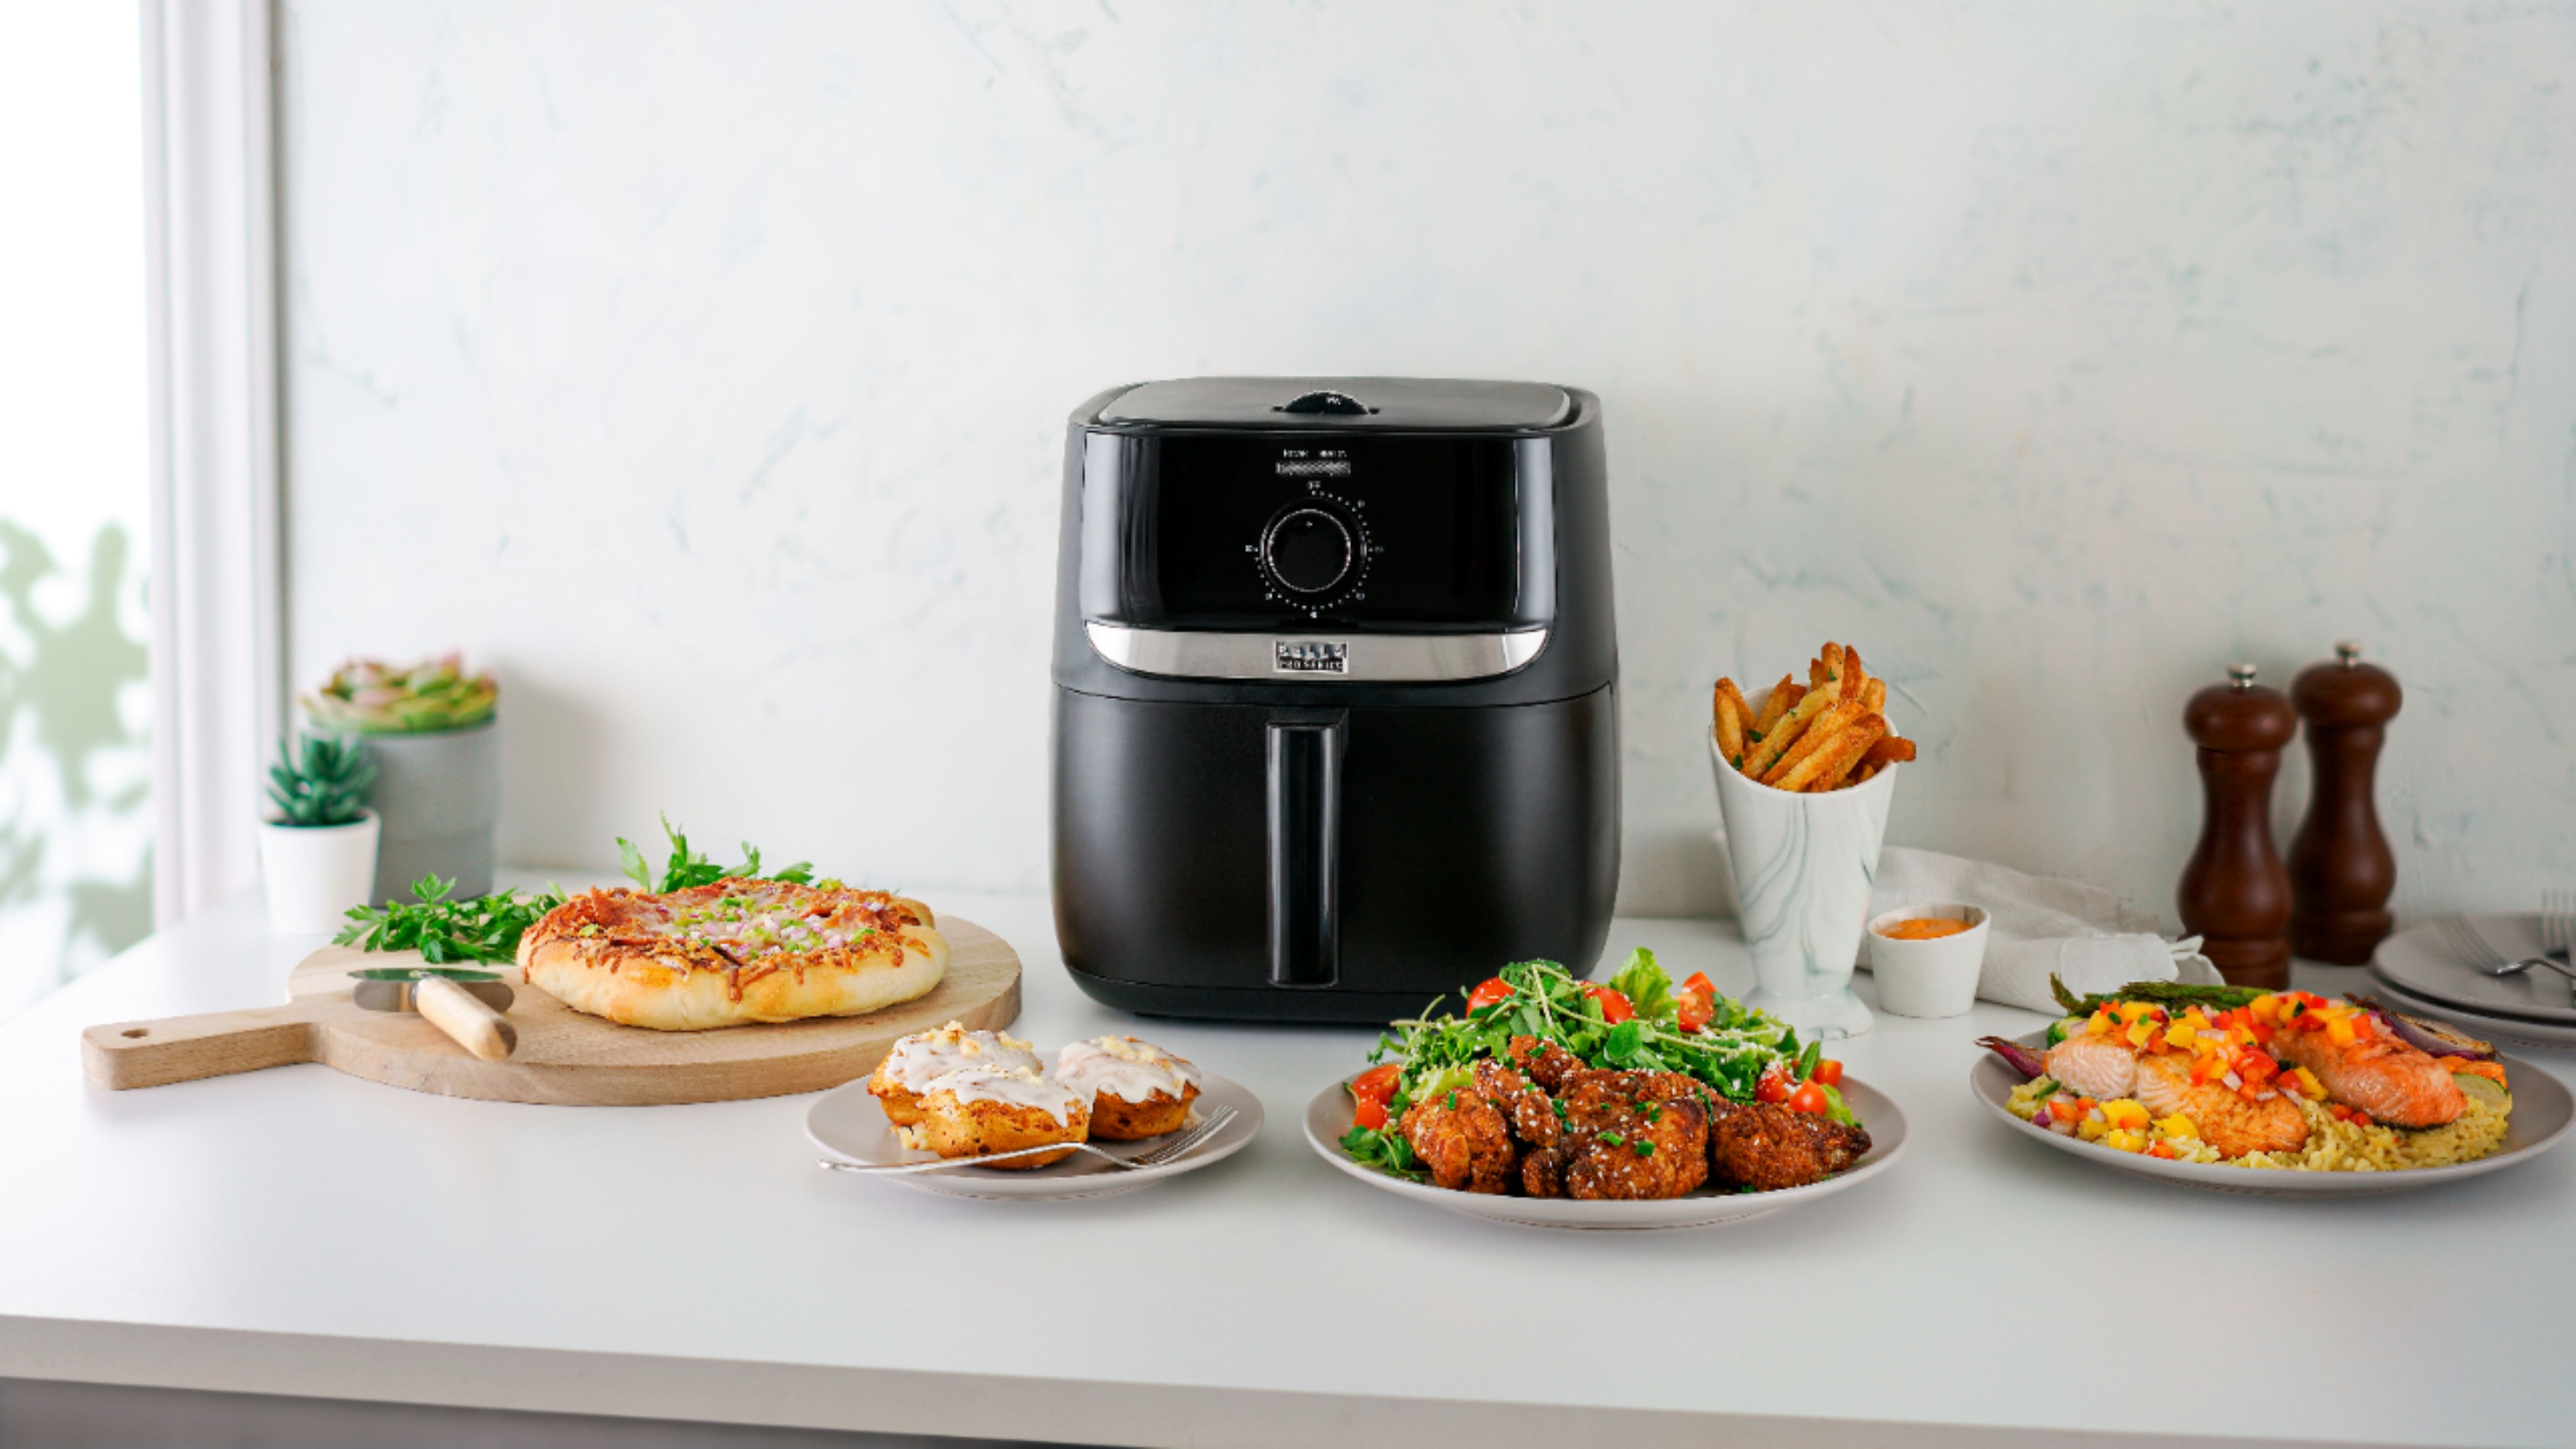 Bella's Pro Series 6-qt. air fryer also bakes and roasts, now 50